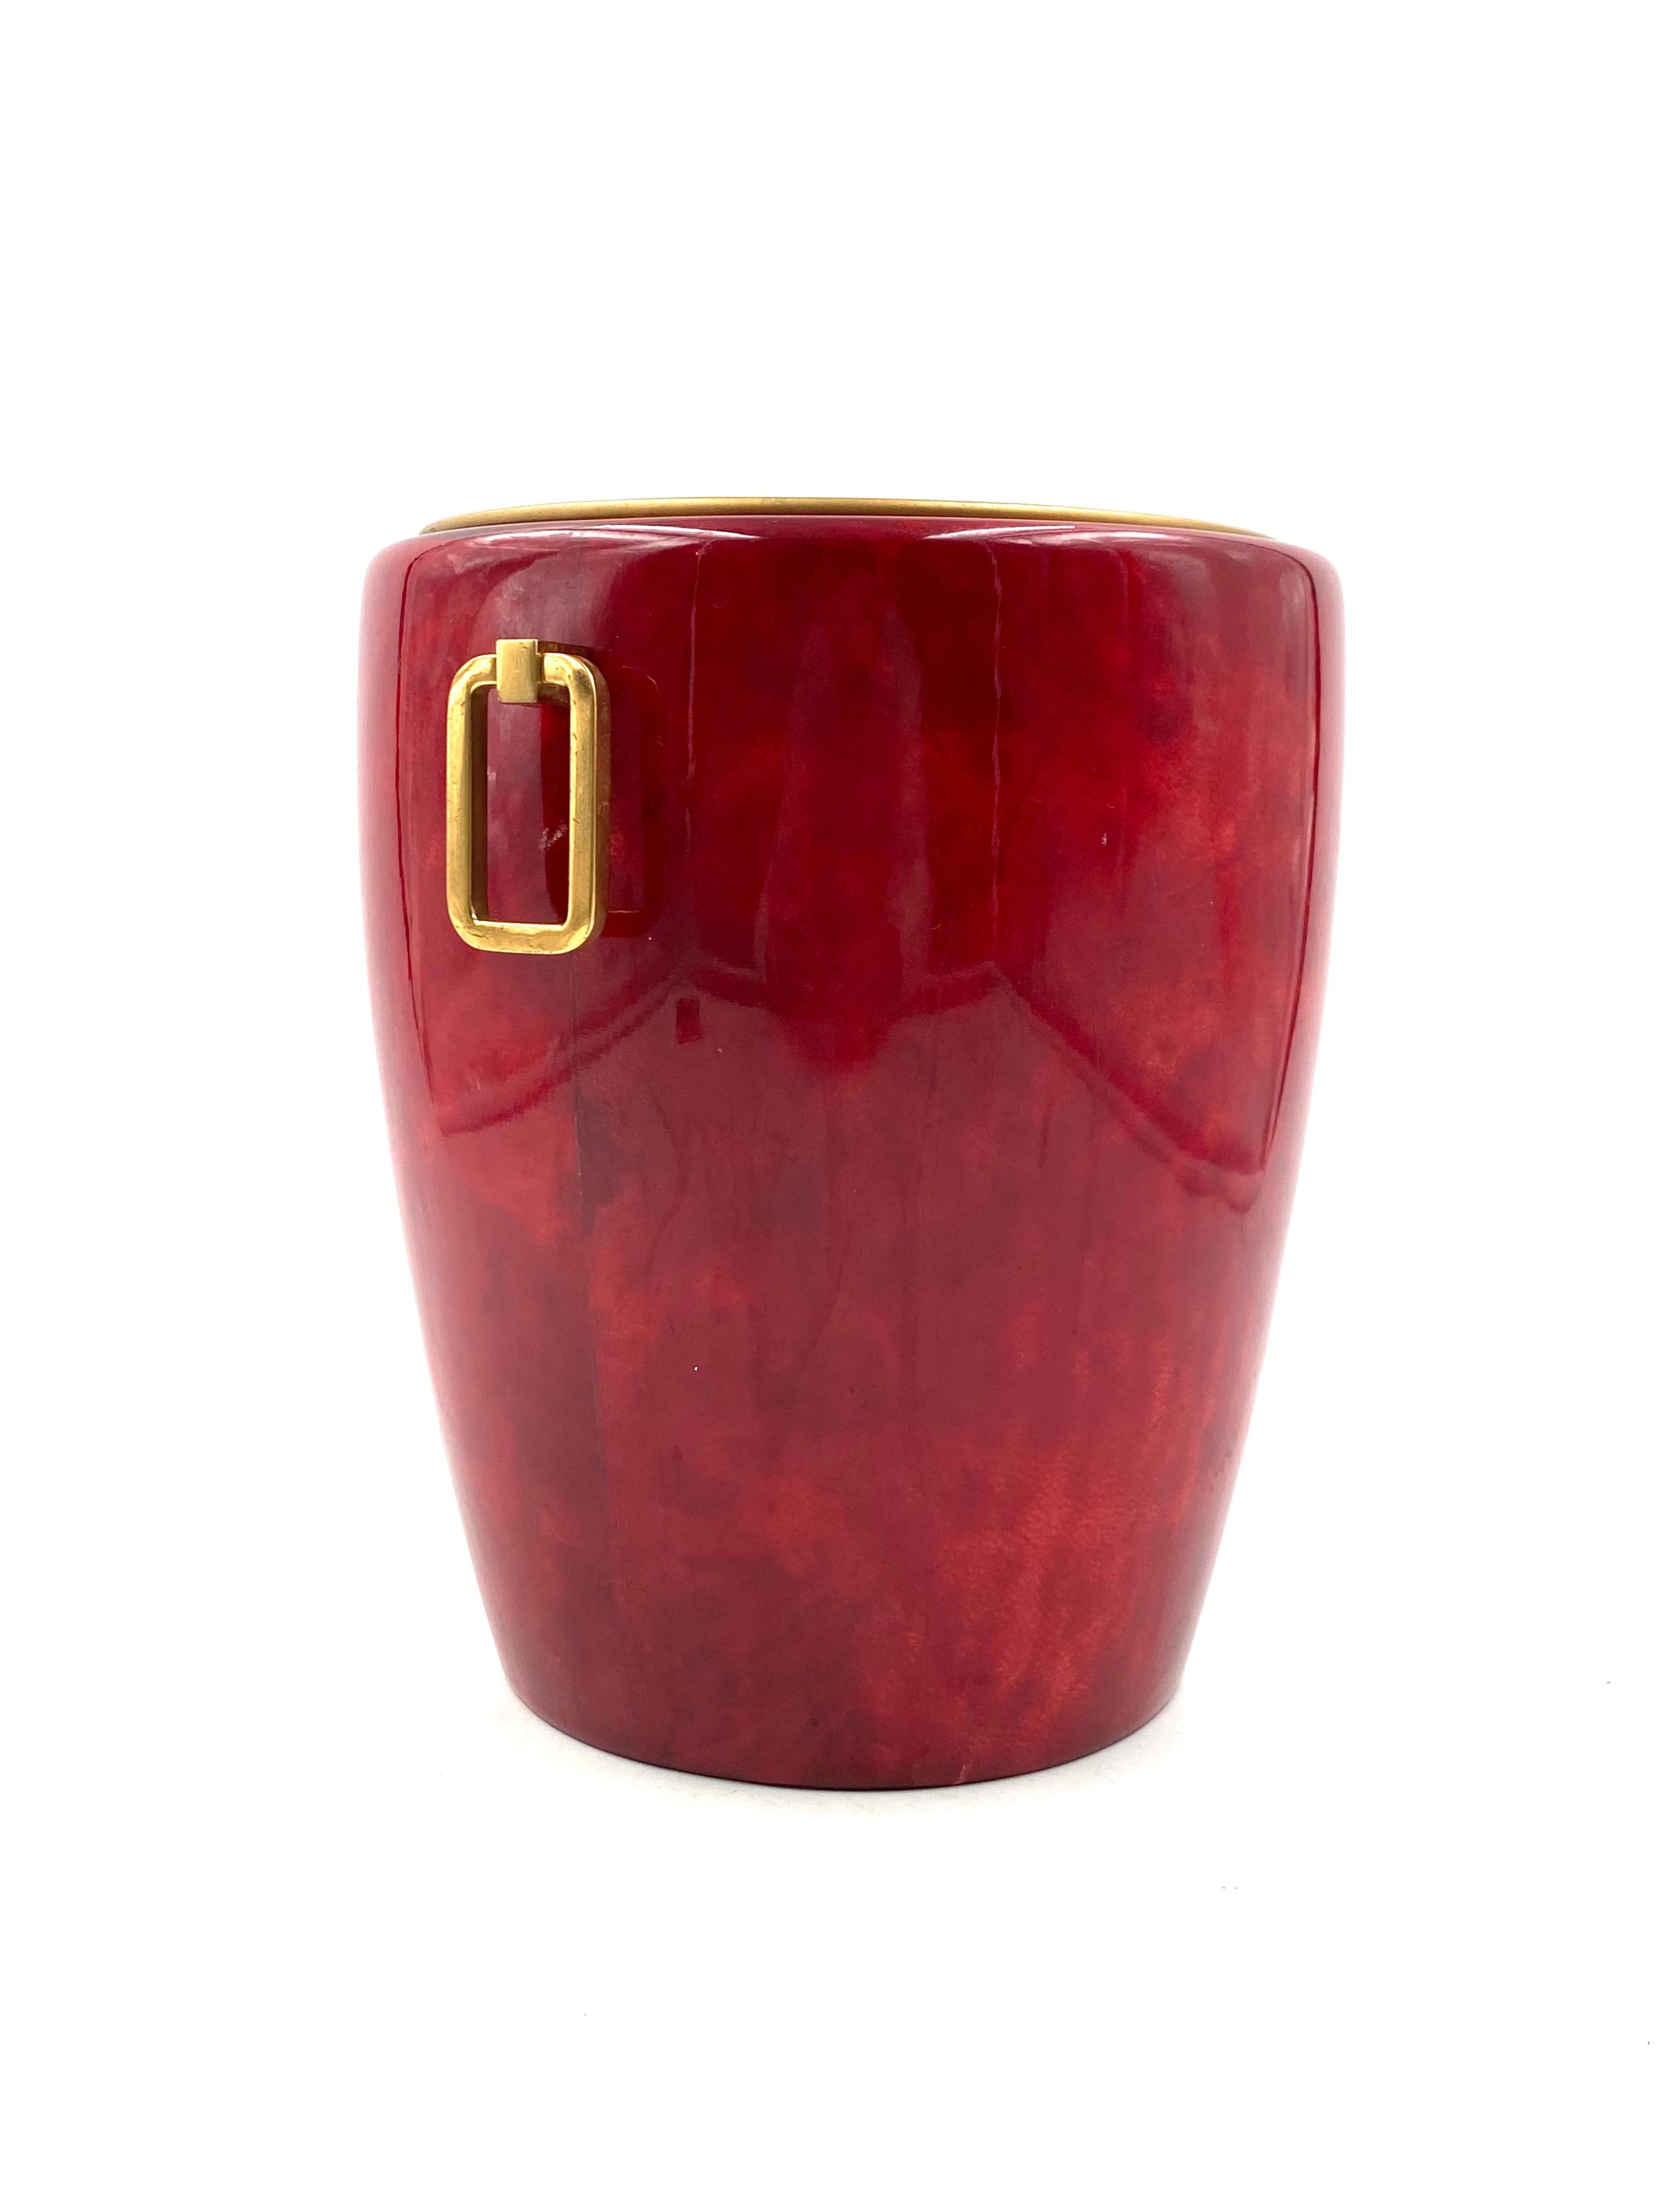 Aldo Tura, Brass and red Parchment cooler / Ice bucket, Italy, 1960s 3